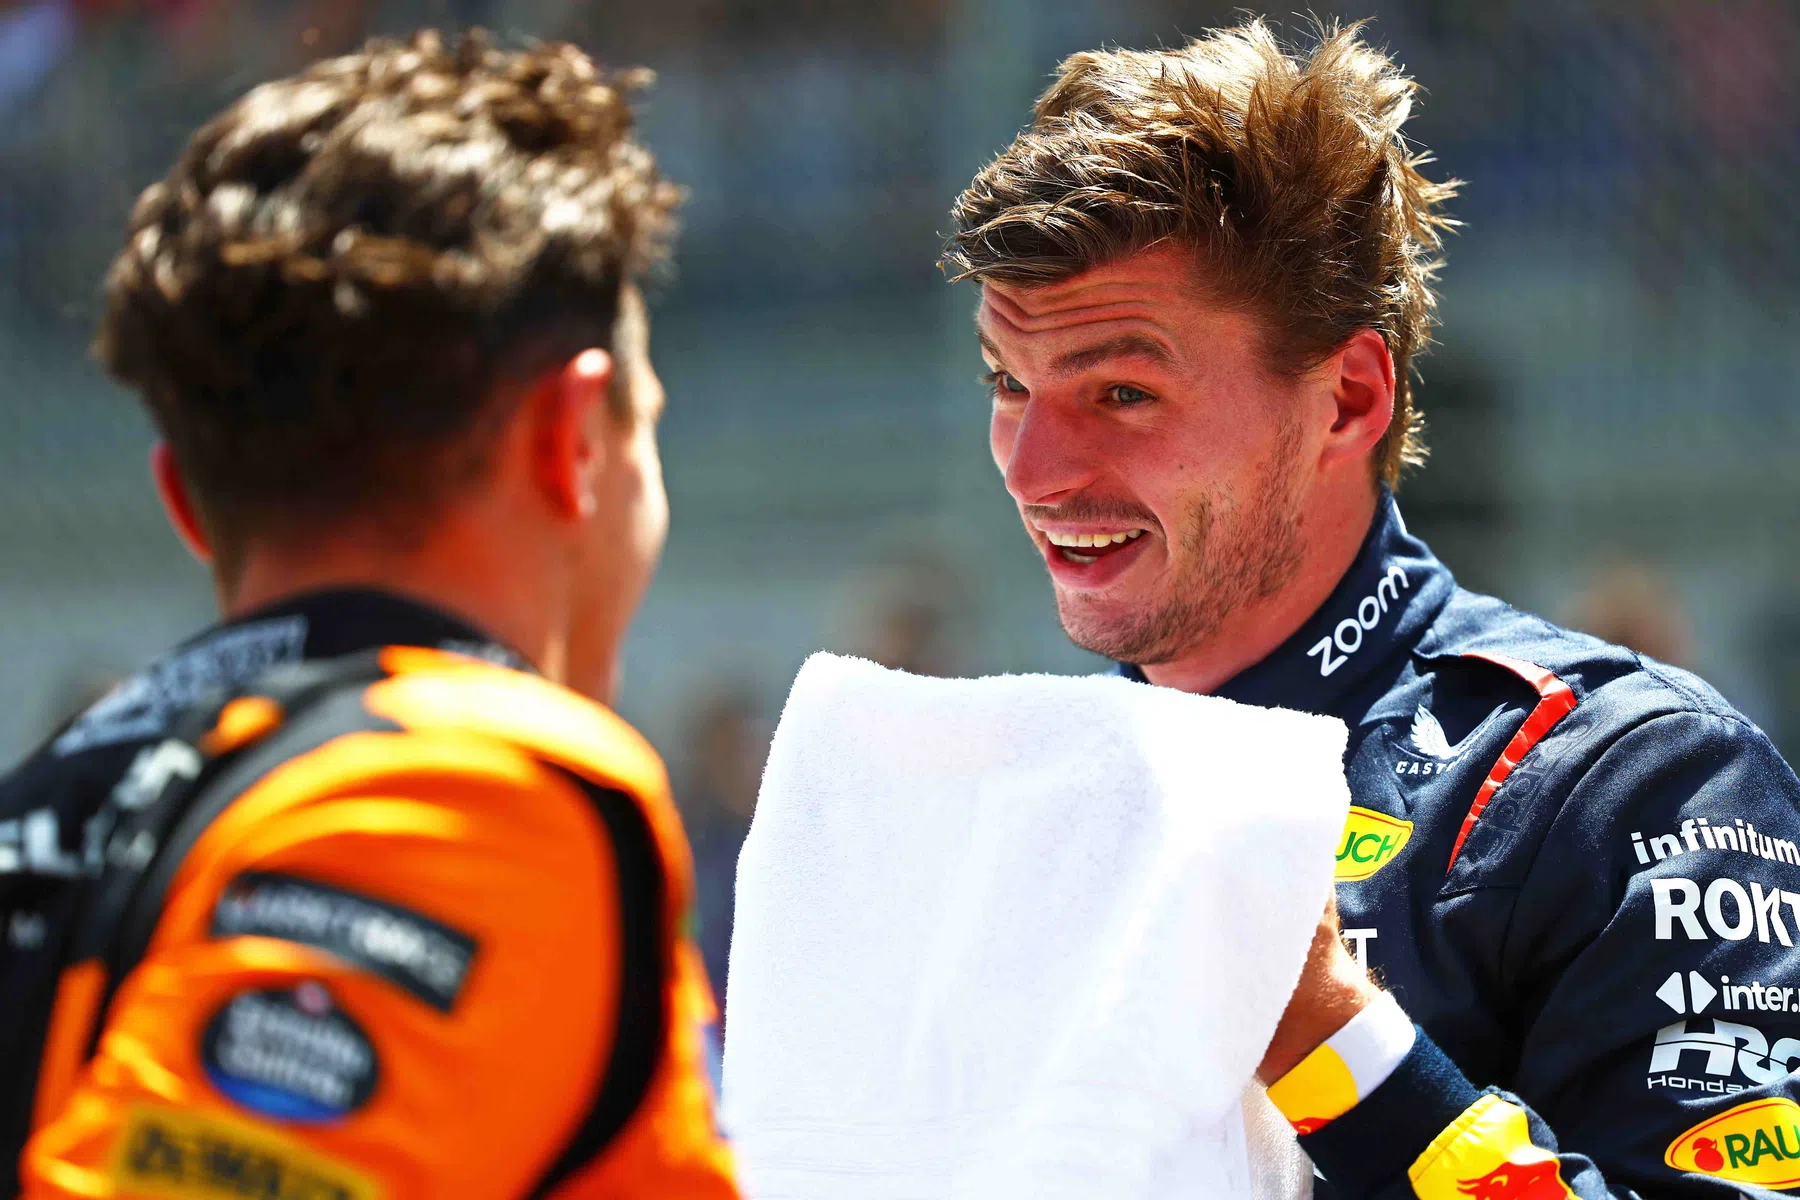 max verstappen wants to remain friends with lando norris